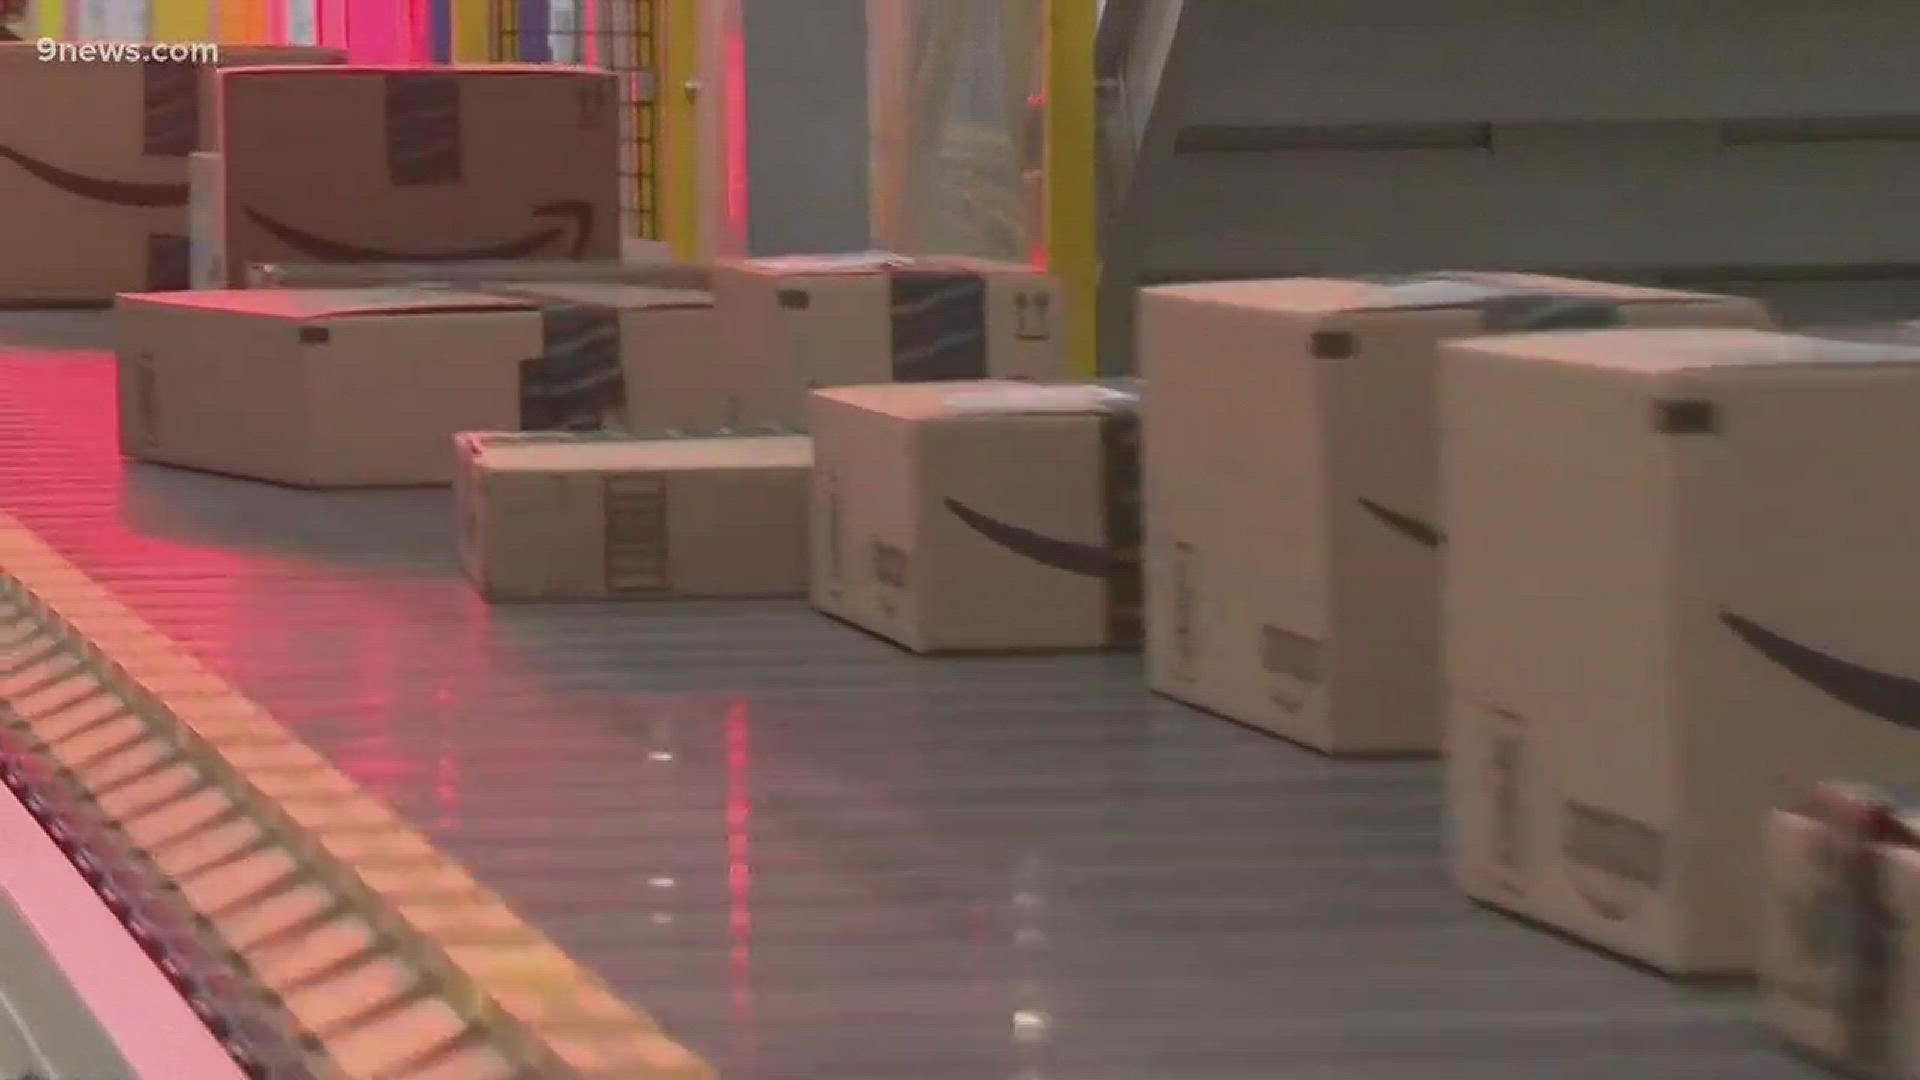 Amazon has announced plans to expand its Denver tech presence by creating hundreds of new jobs and adding a downtown Denver office.